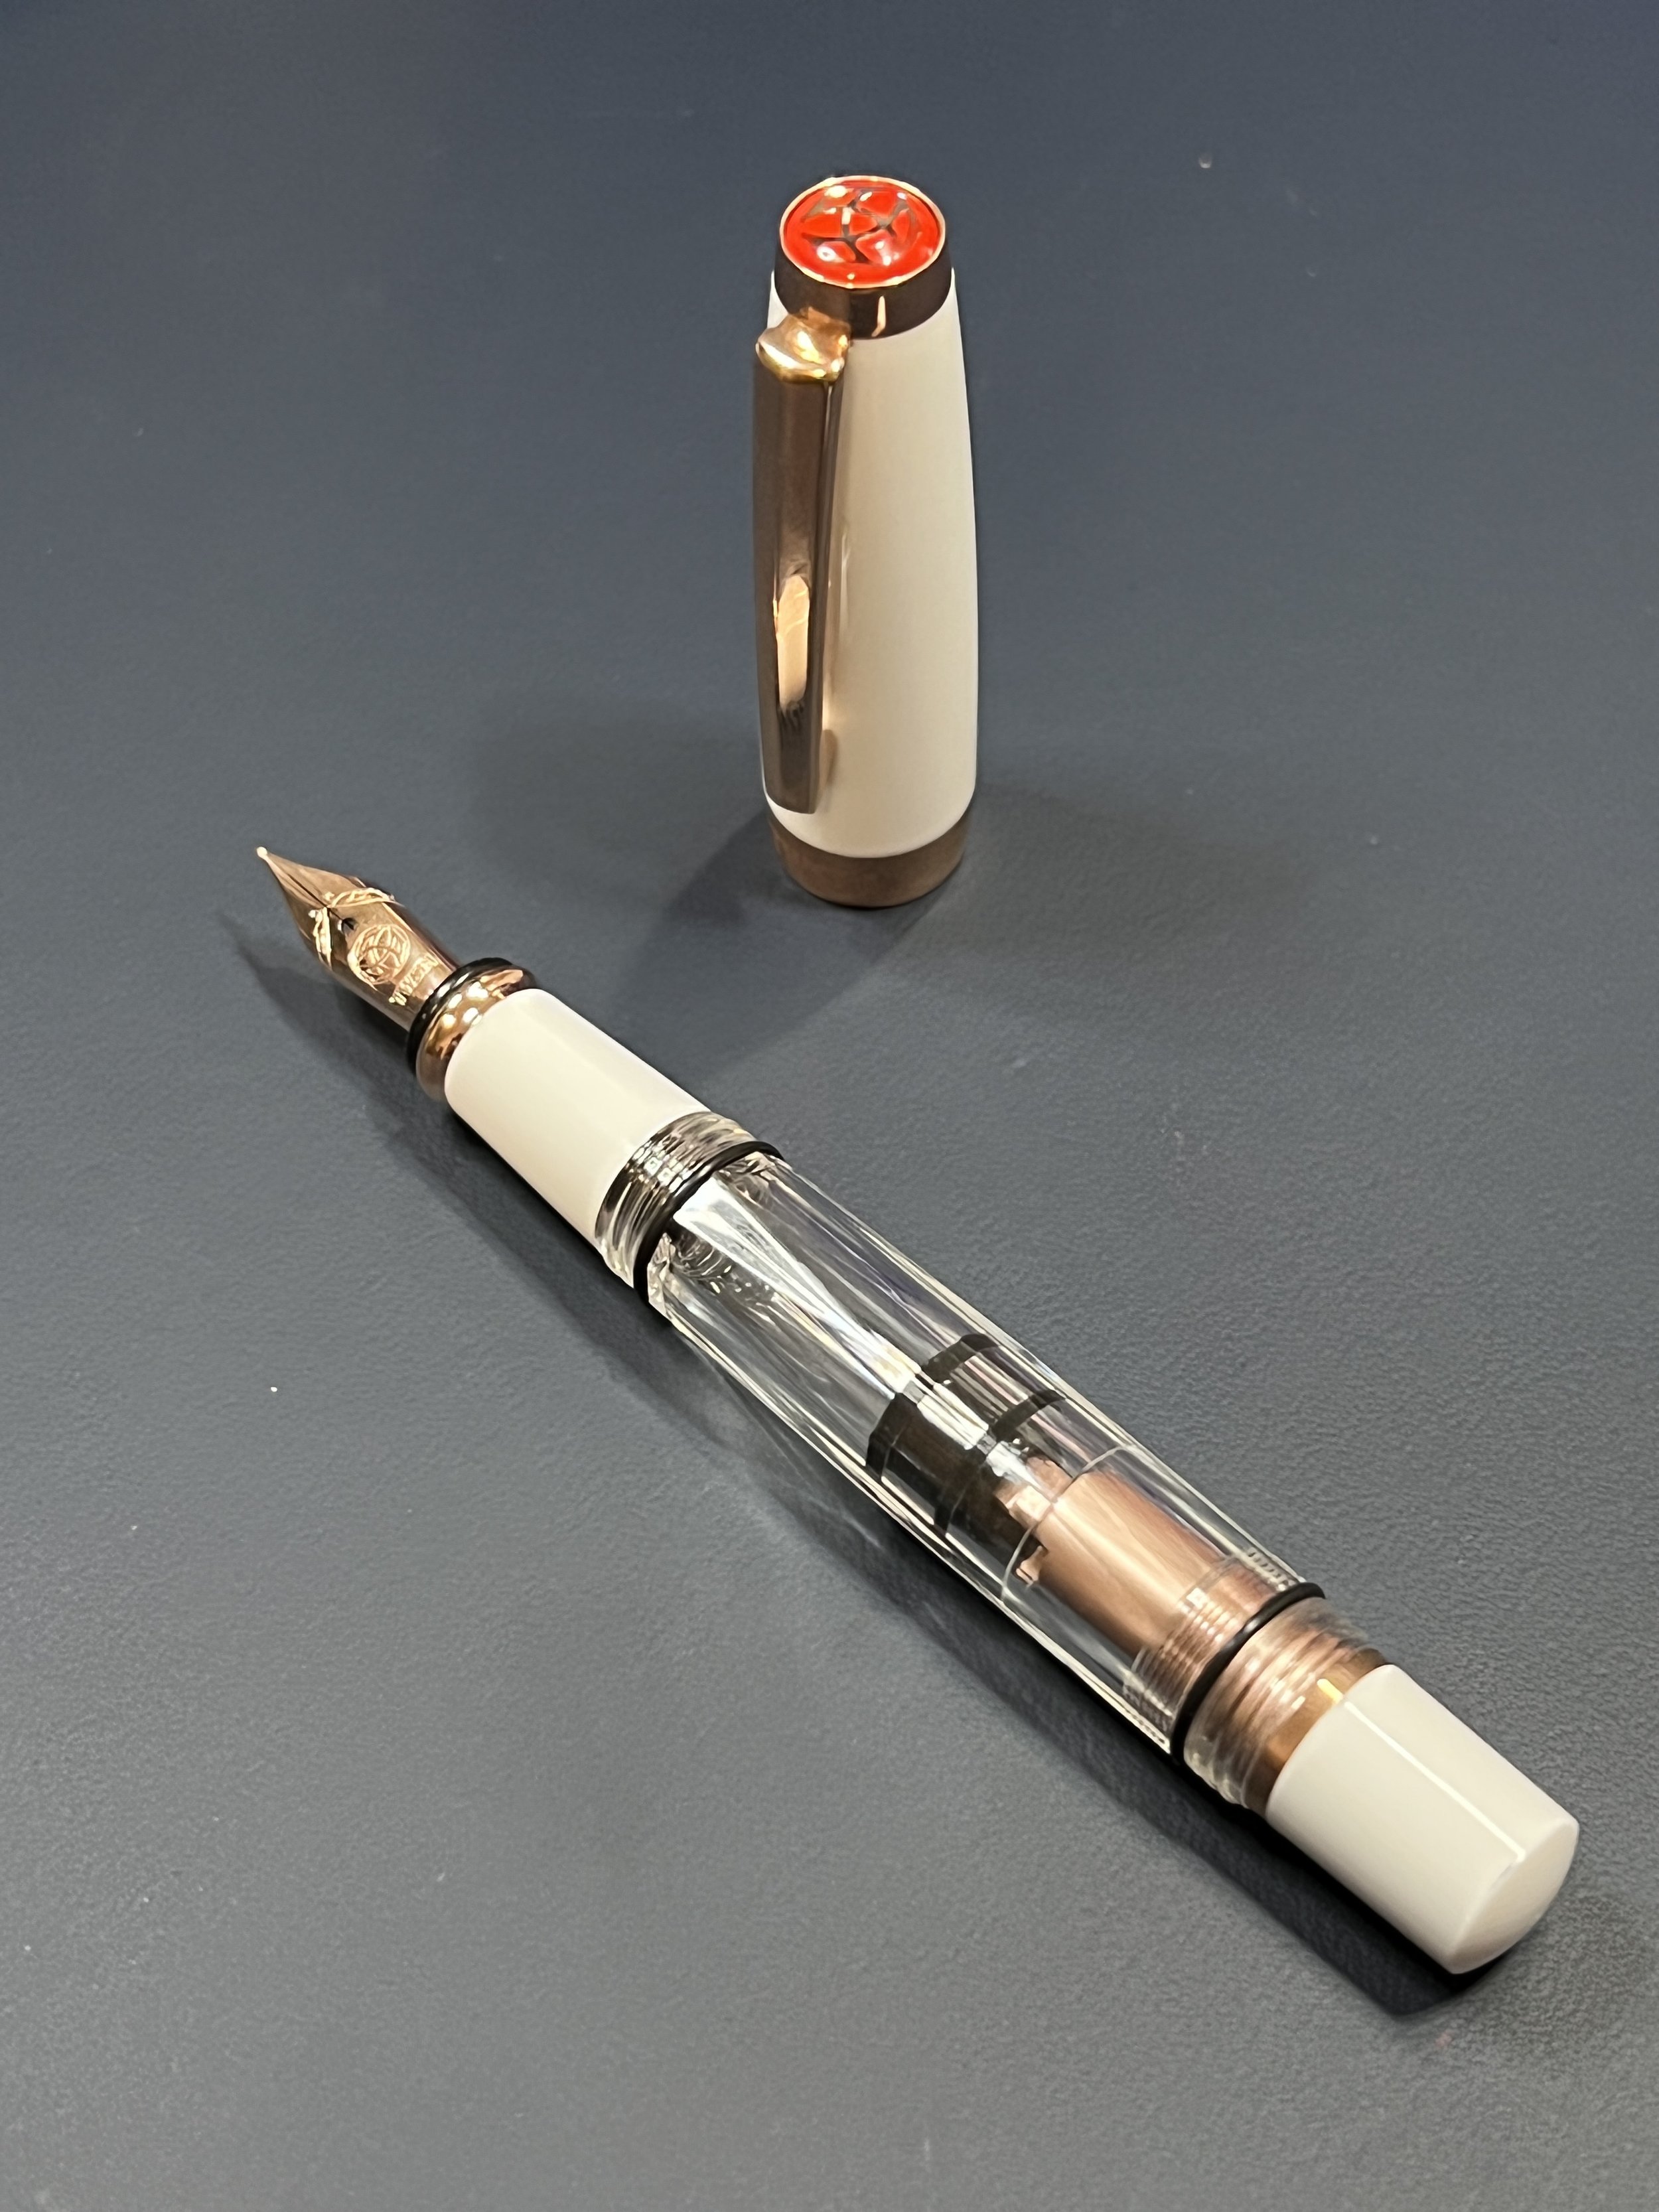 STUNNING HIGH QUALITY BRASS ROLLER BALL TACTICAL PEN WITH POCKET CLIP 